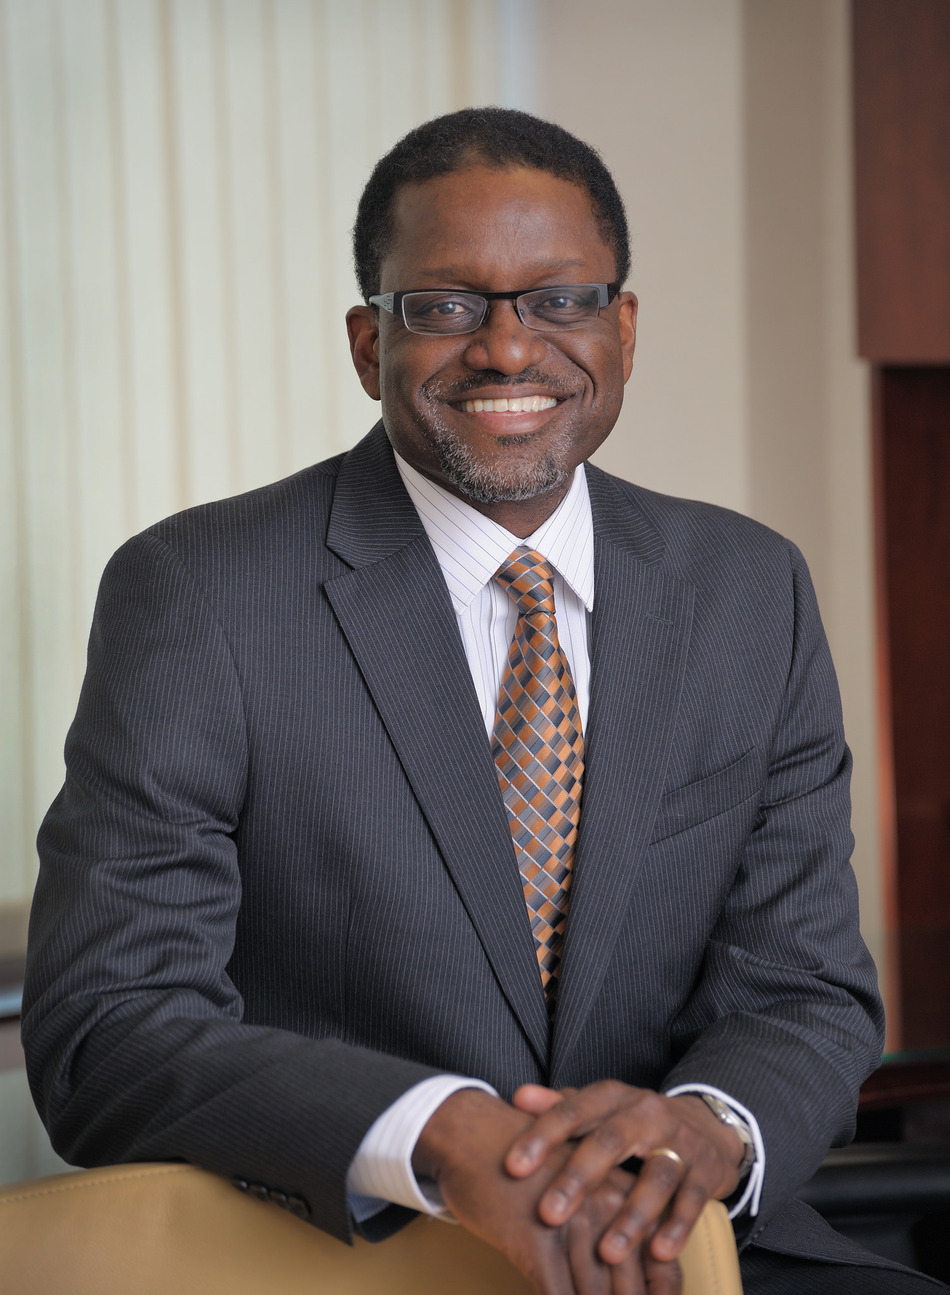 Improving our Nation’s Heart Health: A Conversation with NHLBI Director, Gary Gibbons